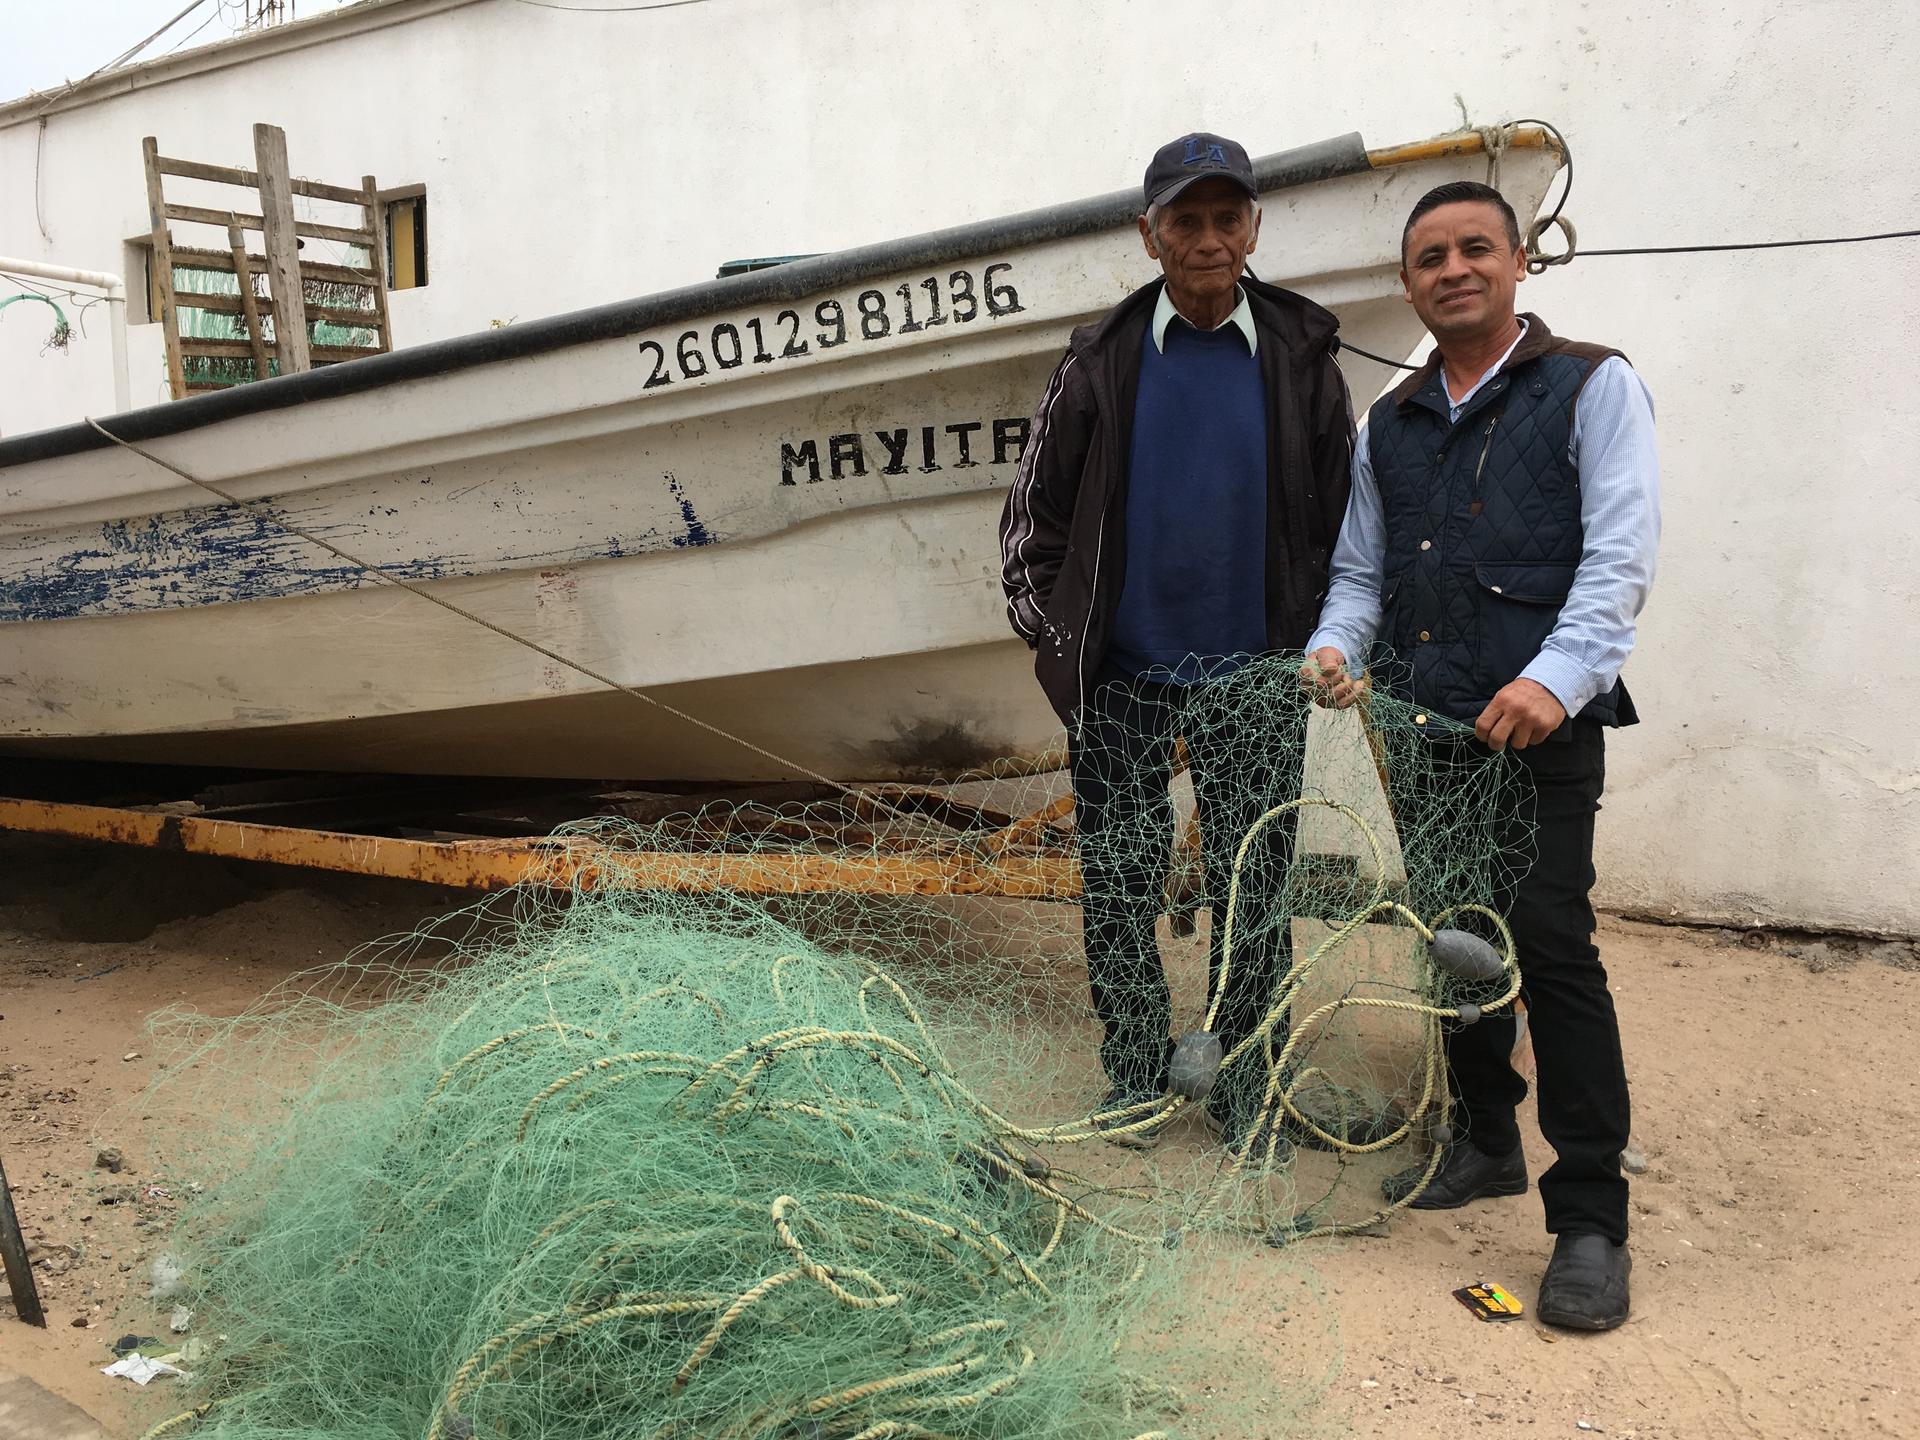 Tito Monrroy and his son Rigoberto are lifelong fishermen in Mexico’s Gulf of California but restrictions to protect endangered species have made it difficult for them to get permits. The younger Monrroy now works at a fruit market. Others in and around t